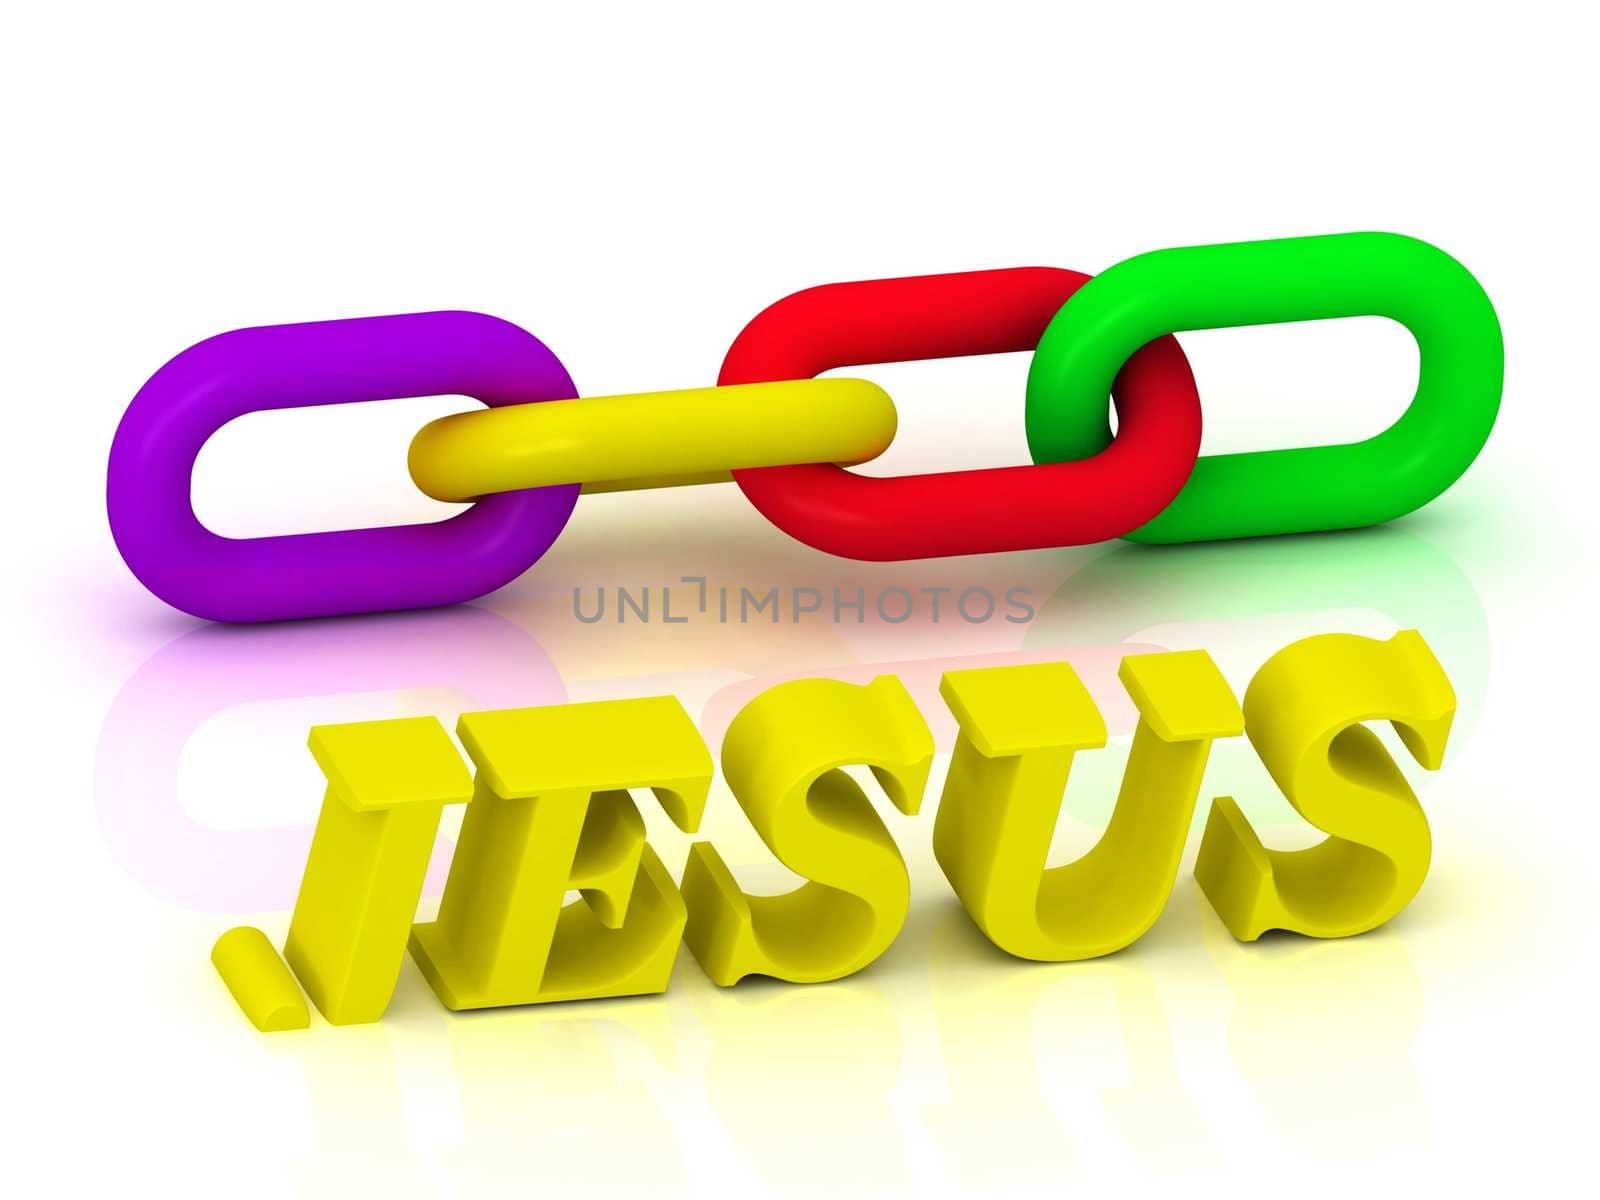 JESUS- Name and Family of bright yellow letters and chain of green, yellow, red section on white background